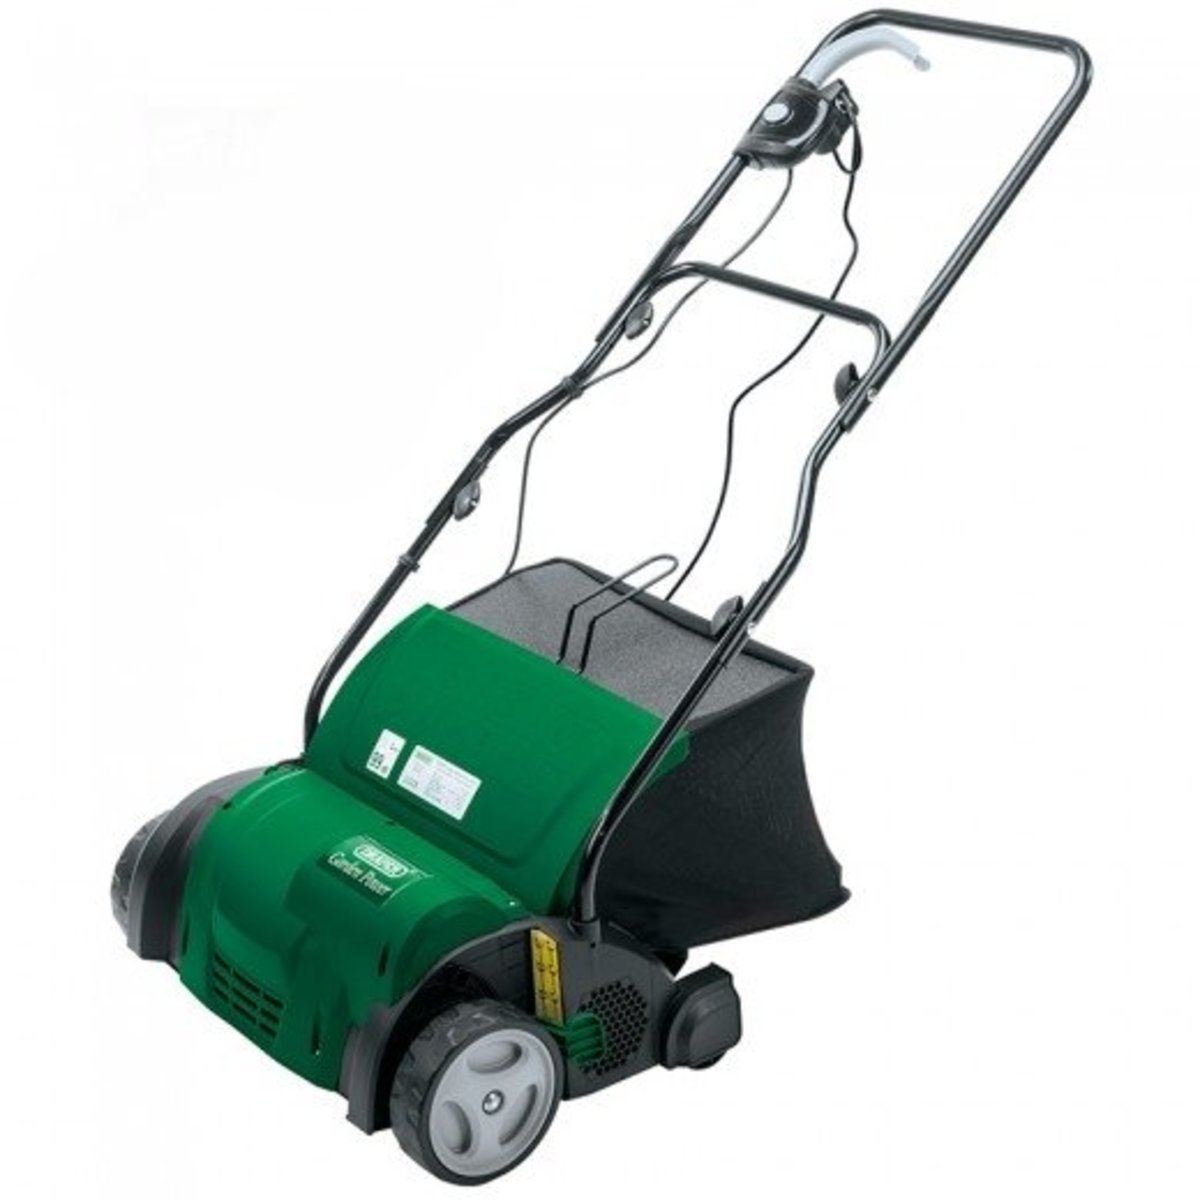 An electric scarifier makes light work of removing moss and other dead vegetation from lawns. 